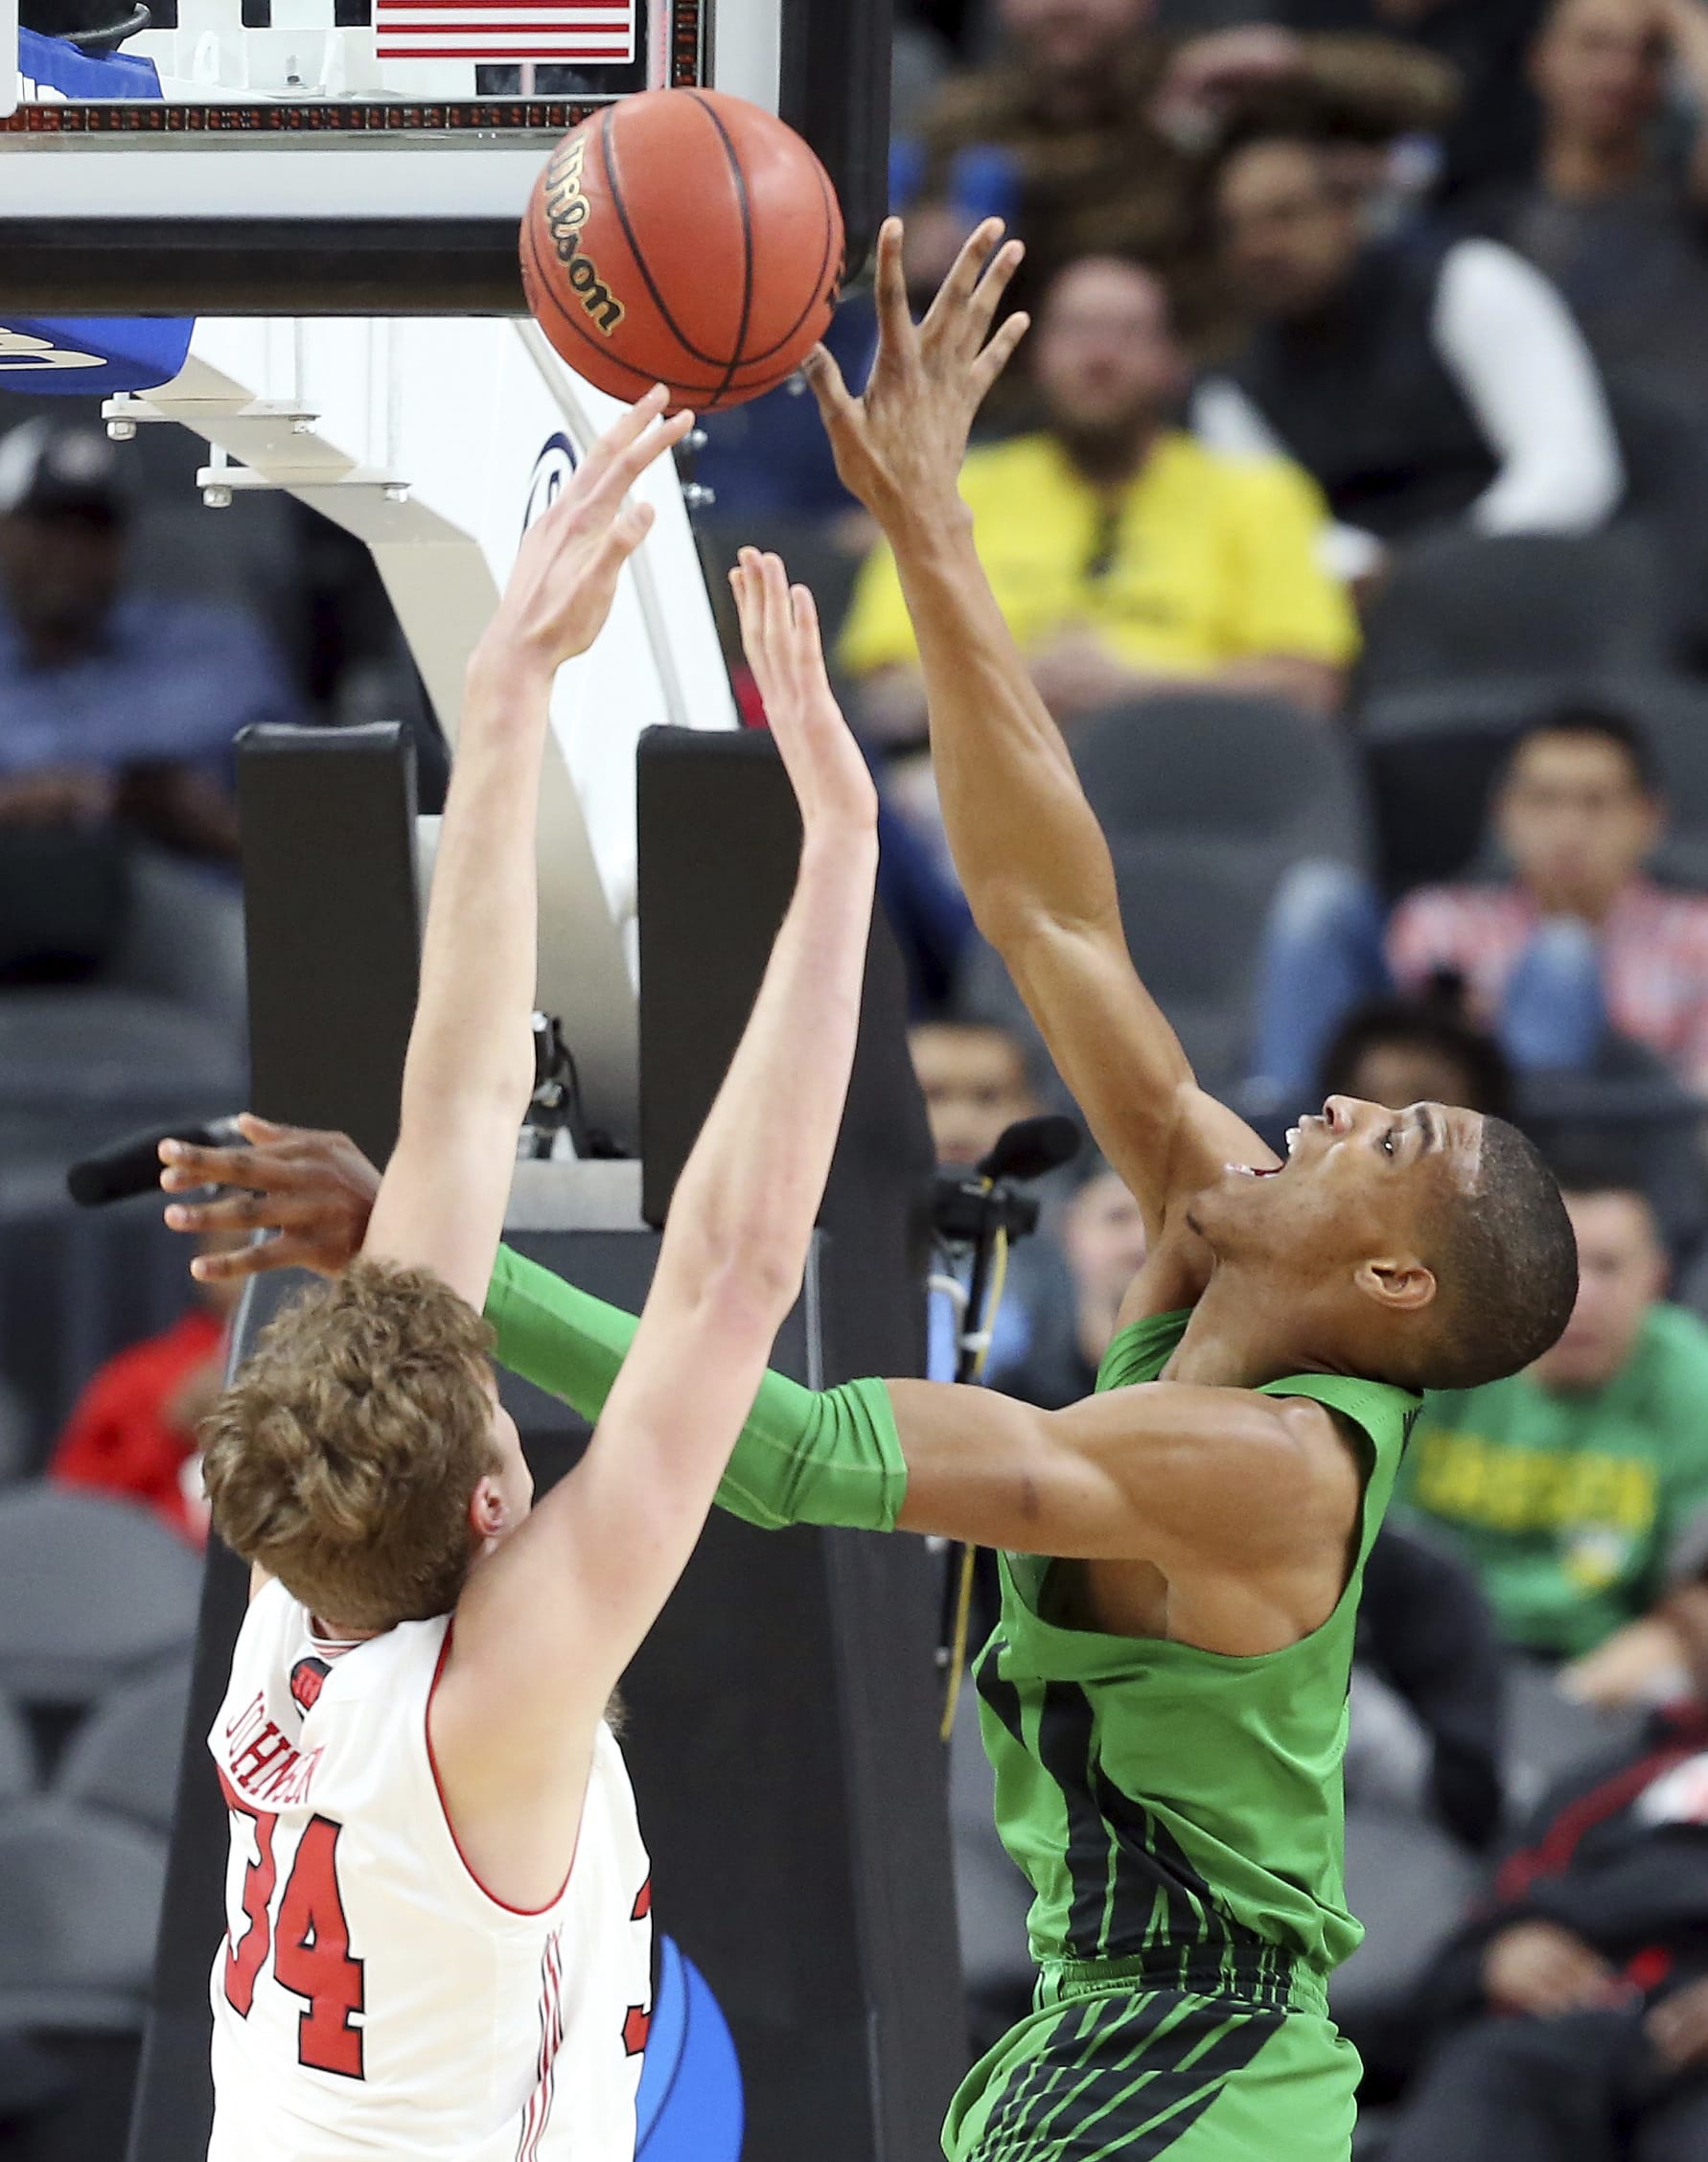 Oregon's Kenny Wooten, right, shoots while covered by Utah's Jayce Johnson during the second half of an NCAA college basketball game in the quarterfinals of the Pac-12 men's tournament Thursday, March 8, 2018, in Las Vegas. Oregon won 68-66.